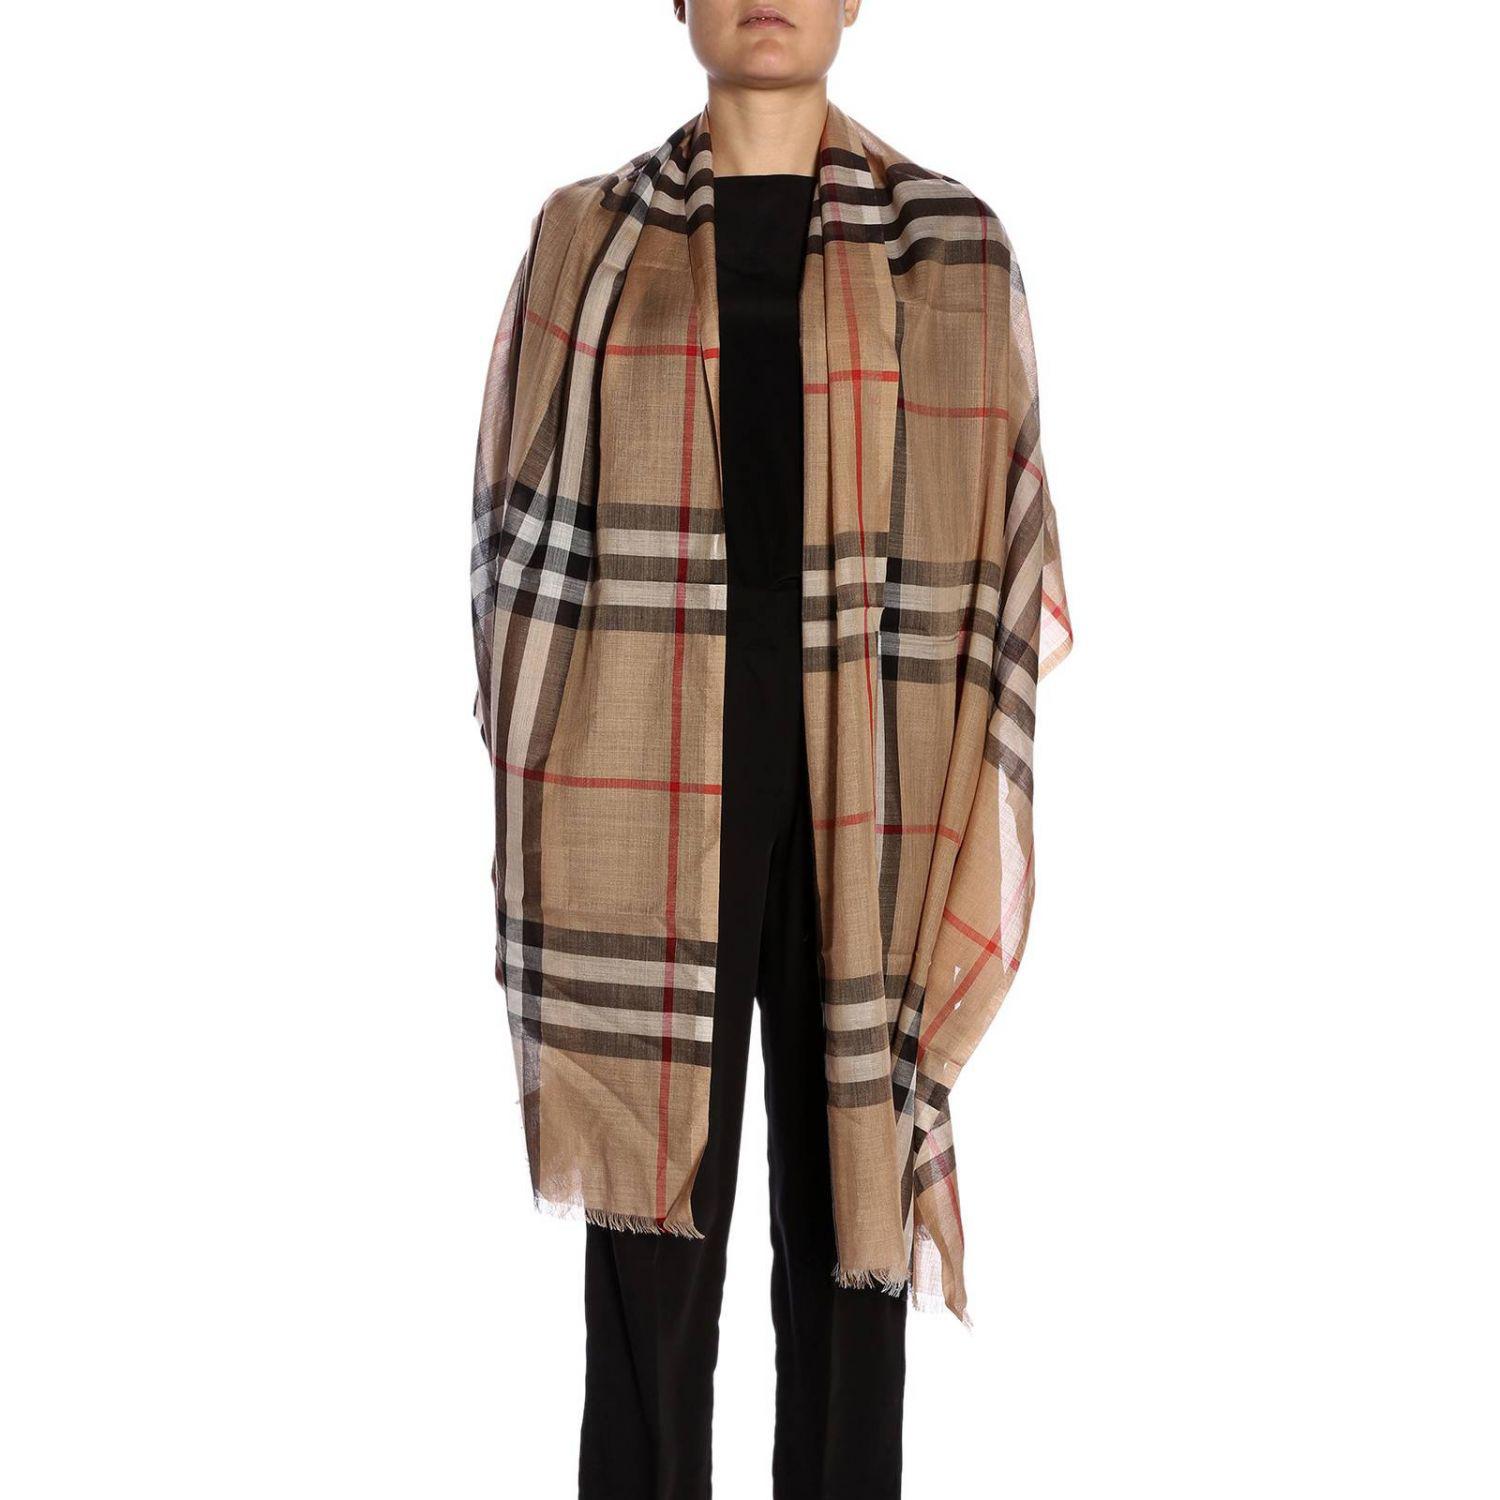 Burberry Classic Giant Check Cashmere Scarf in Camel (Natural) - Lyst